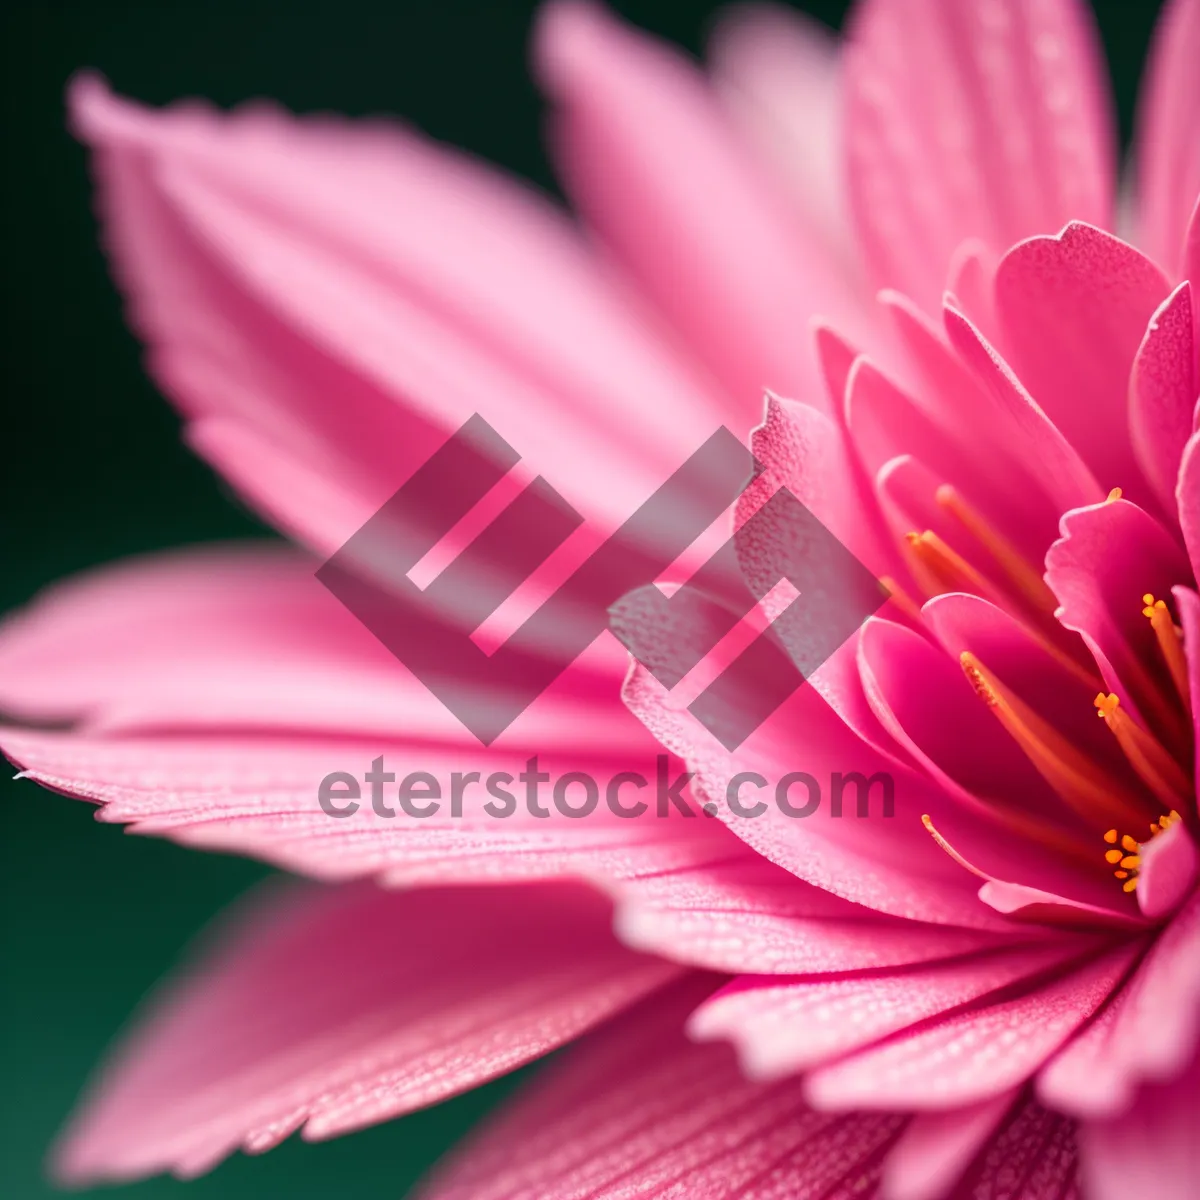 Picture of Pink Daisy Blossom - Beautiful Floral Garden Delight